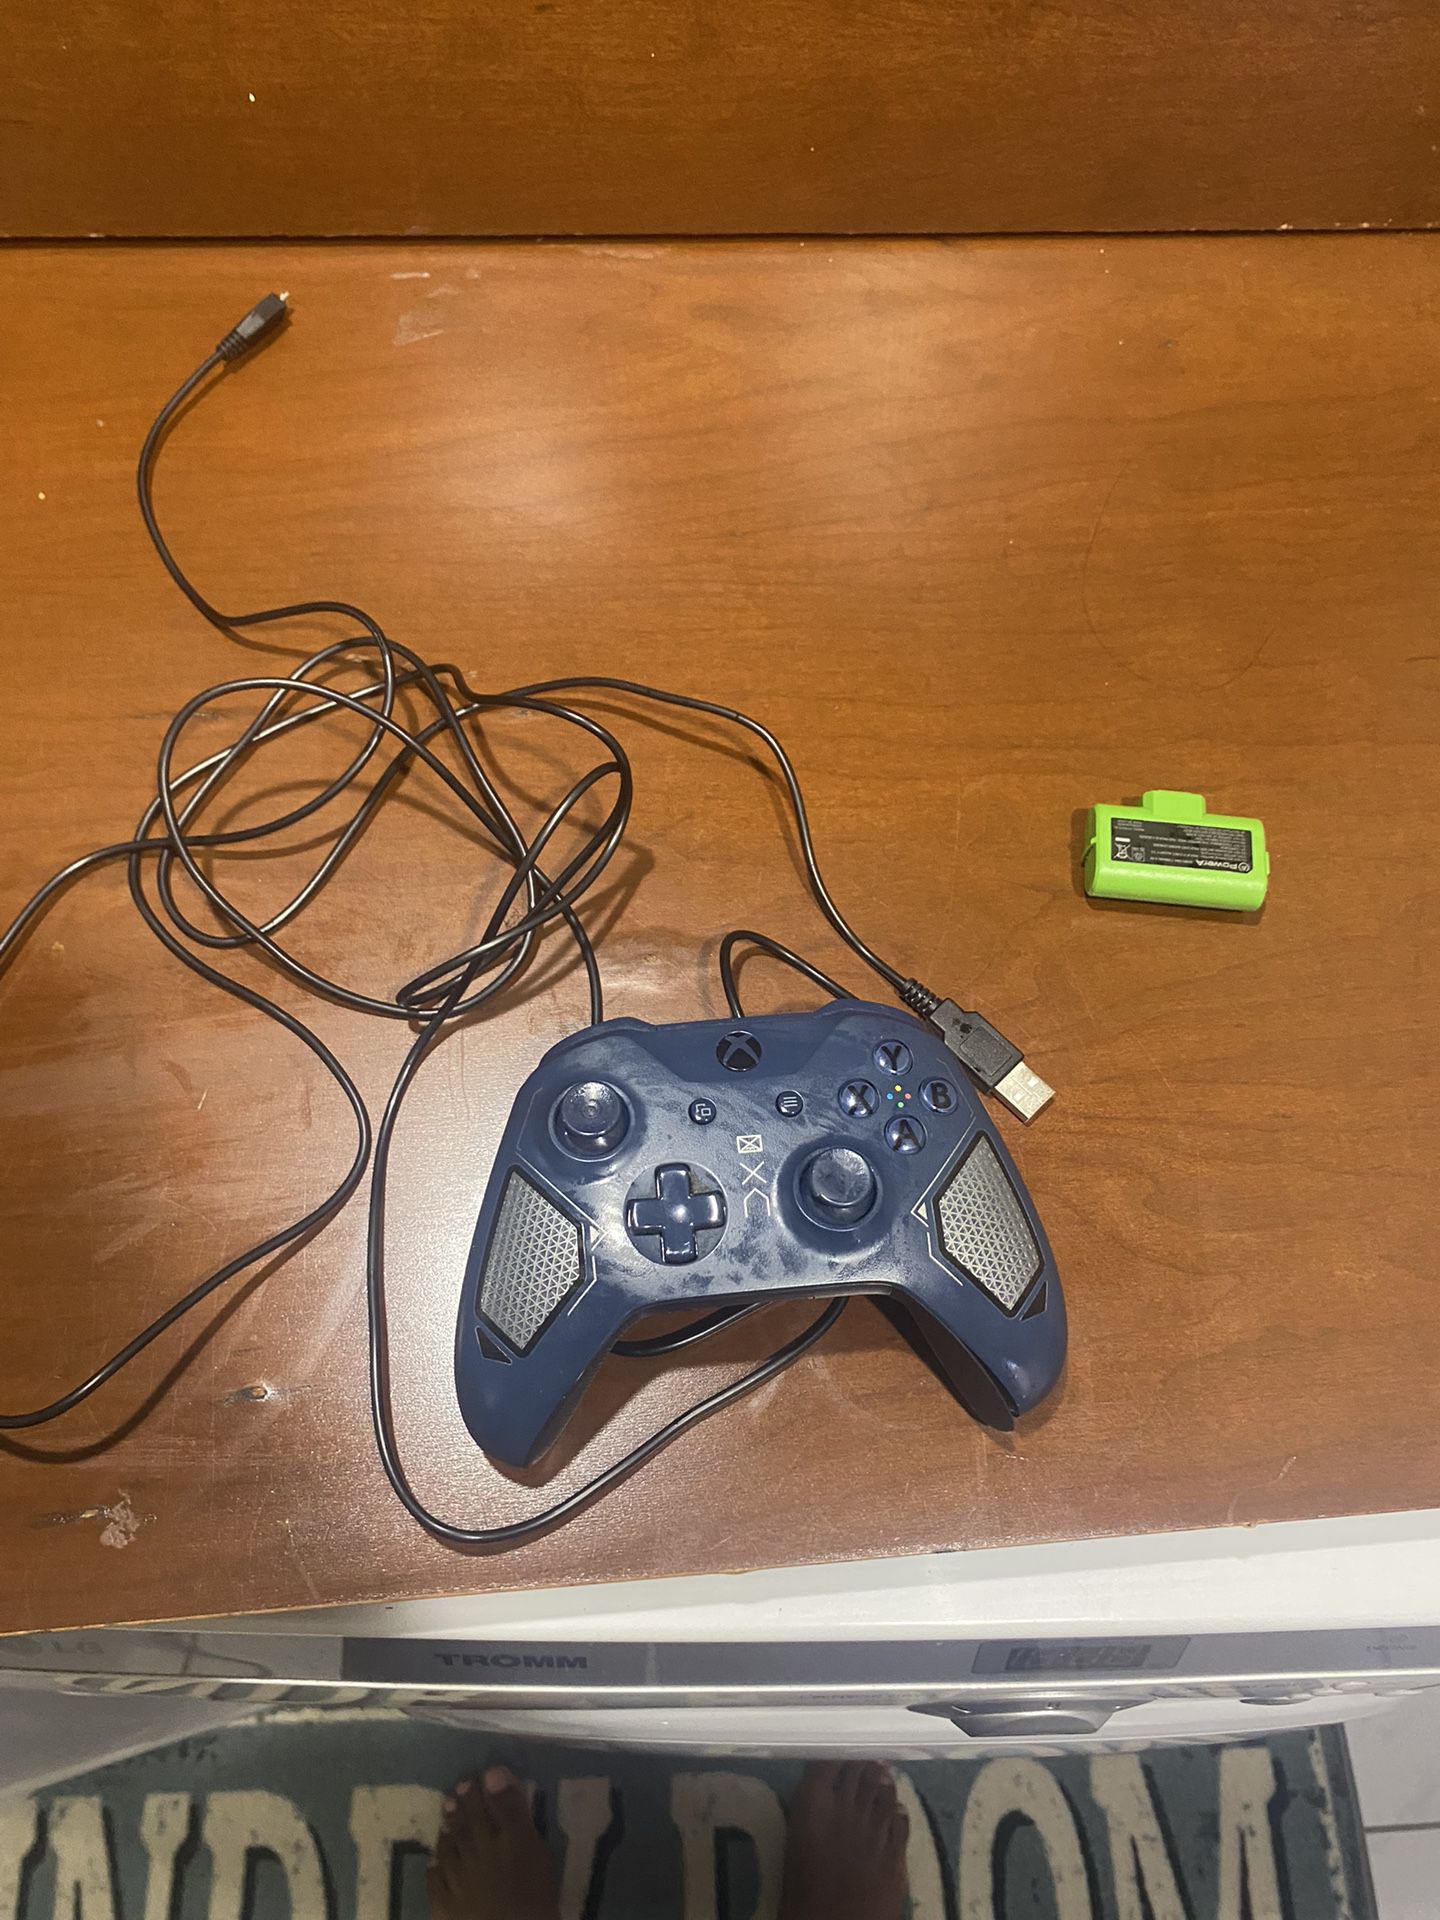 xbox controller with charger and battery 